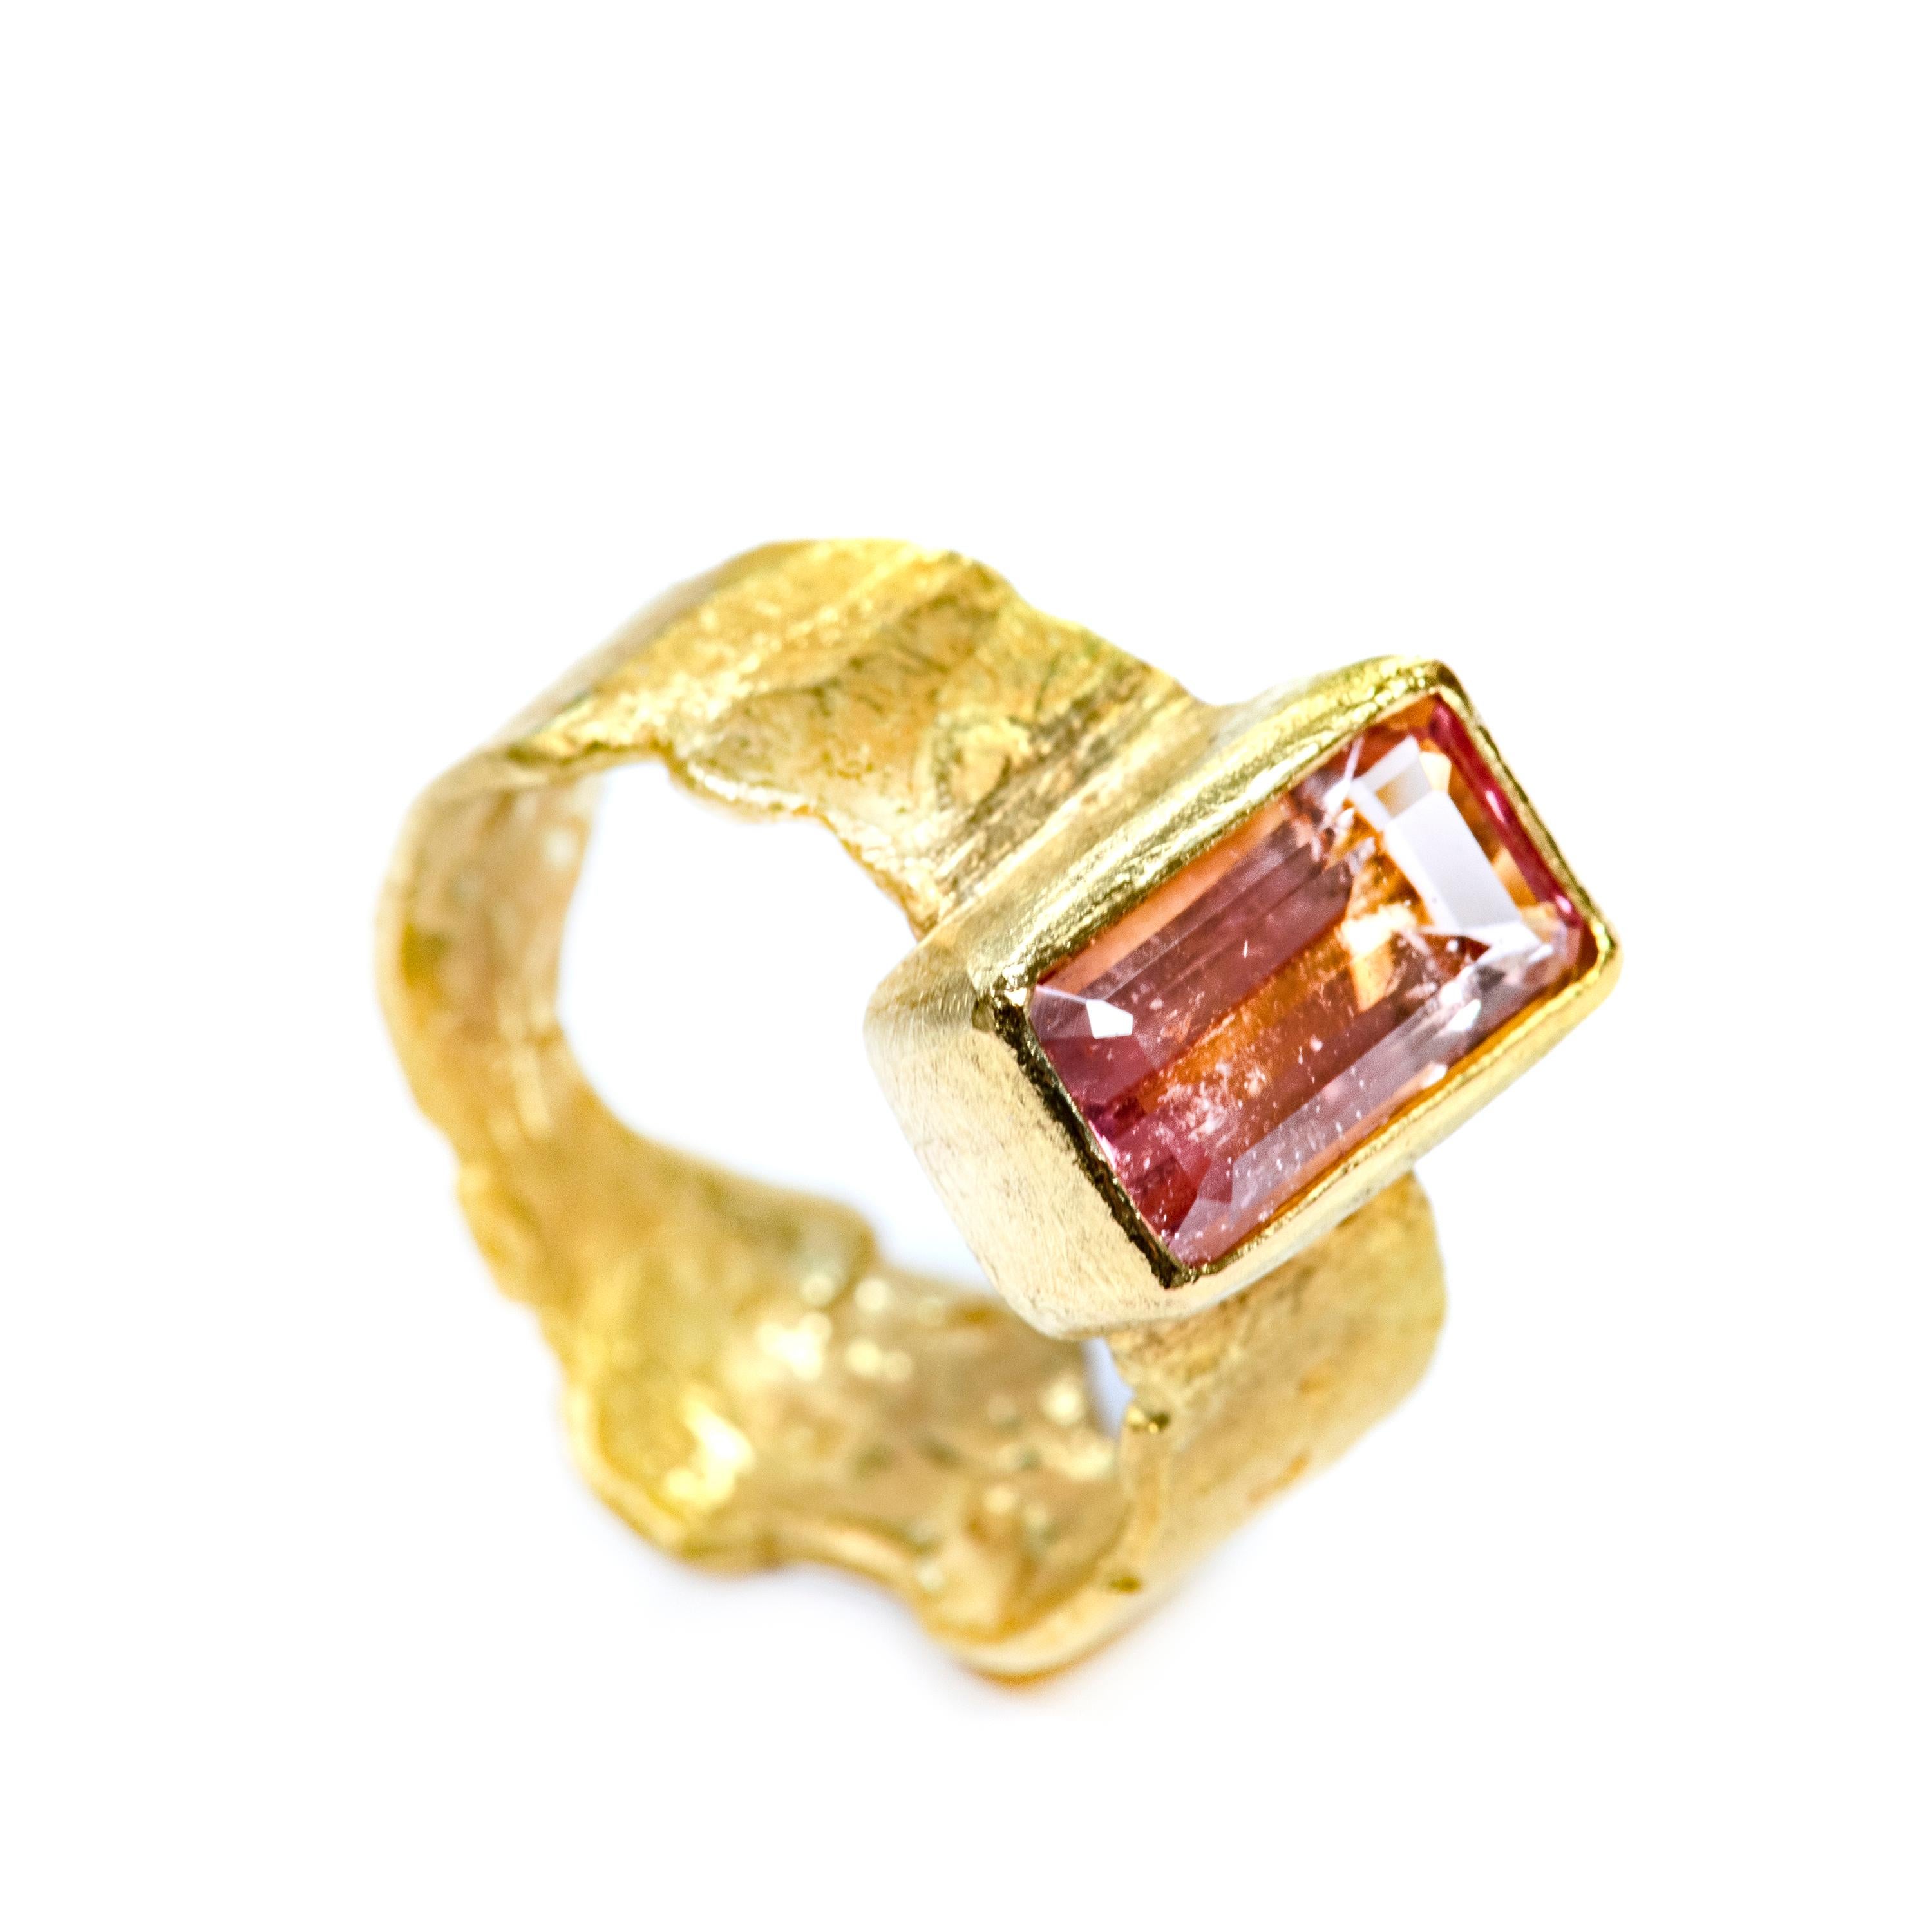 18k gold, organic hammered band with a 2.78ct baguette shaped pink tourmaline.

The band narrows at the back for comfort, 8mm at widest point, 4mm narrowest. The gem stone is 7x12mm with a 6mm depth from finger.

Disa Allsopp makes by hand each ring